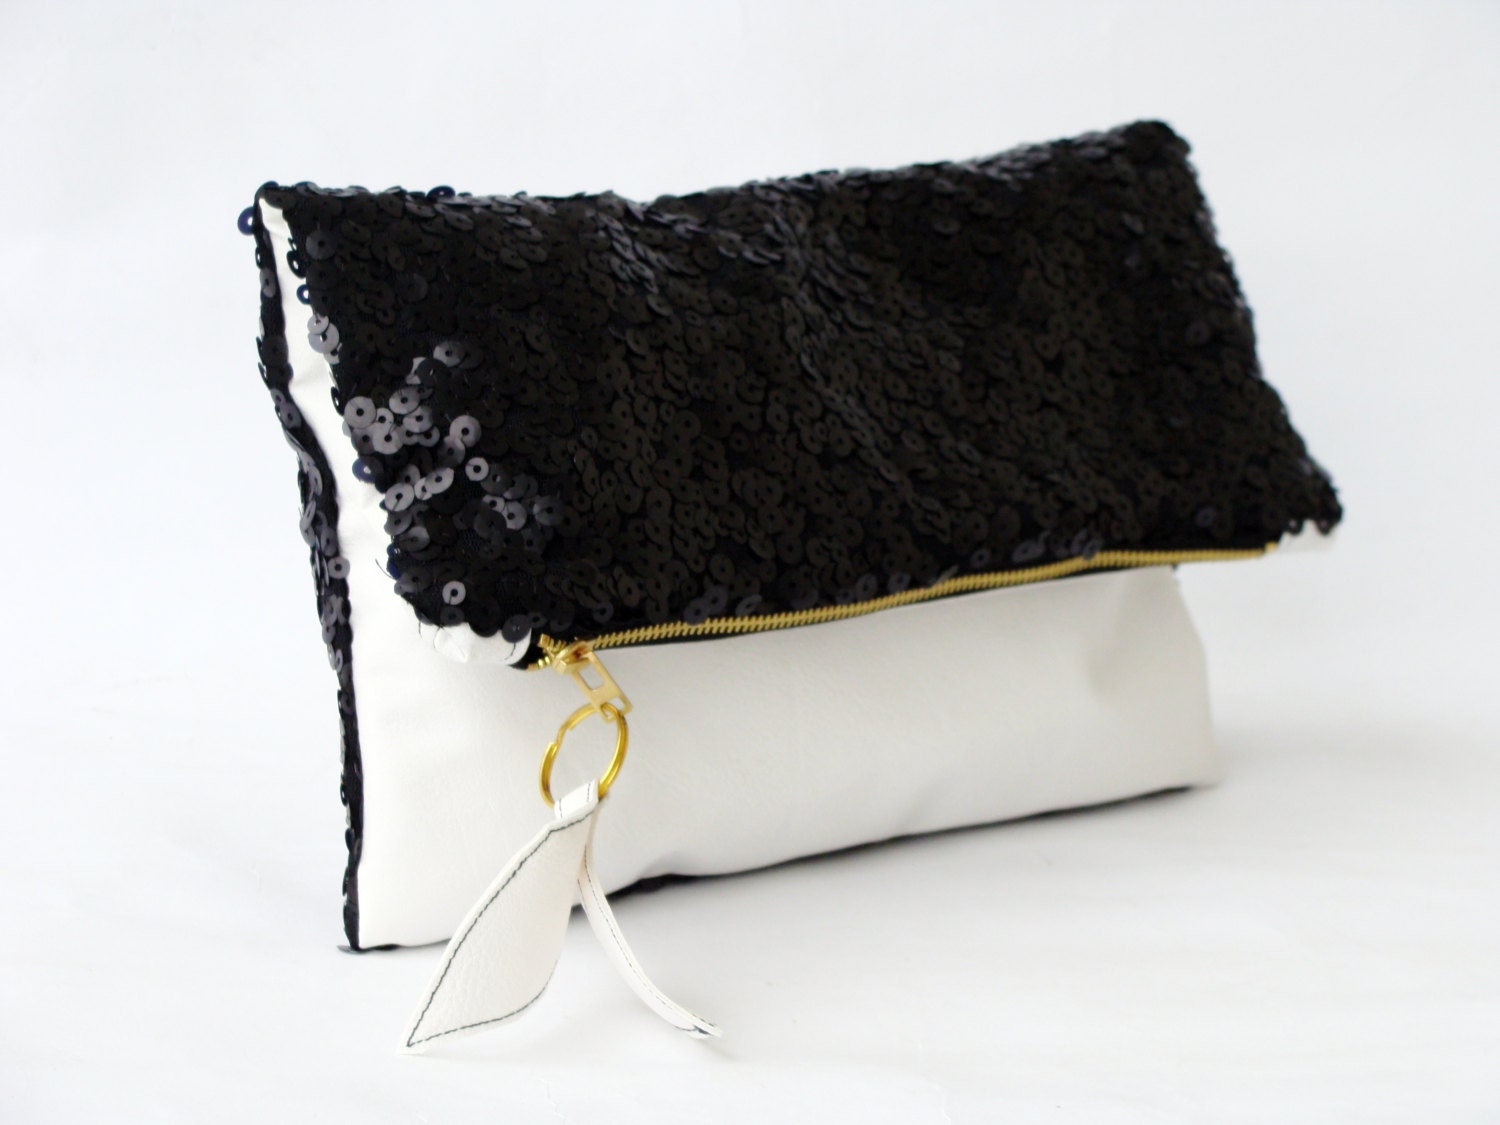 Color block black sequins white leather clutch purse by Razolly